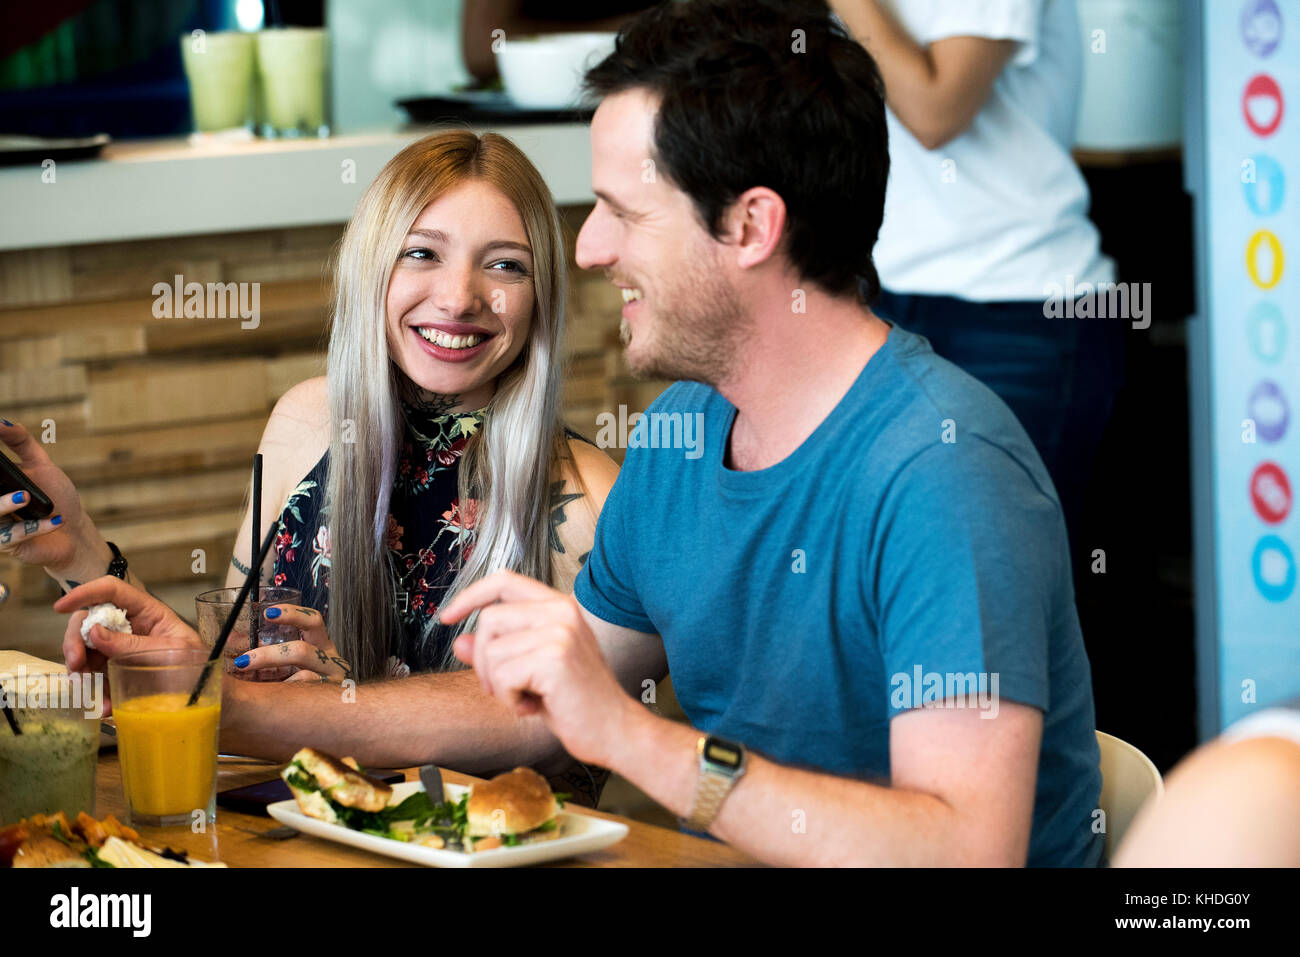 Friends having meal together at restaurant Stock Photo